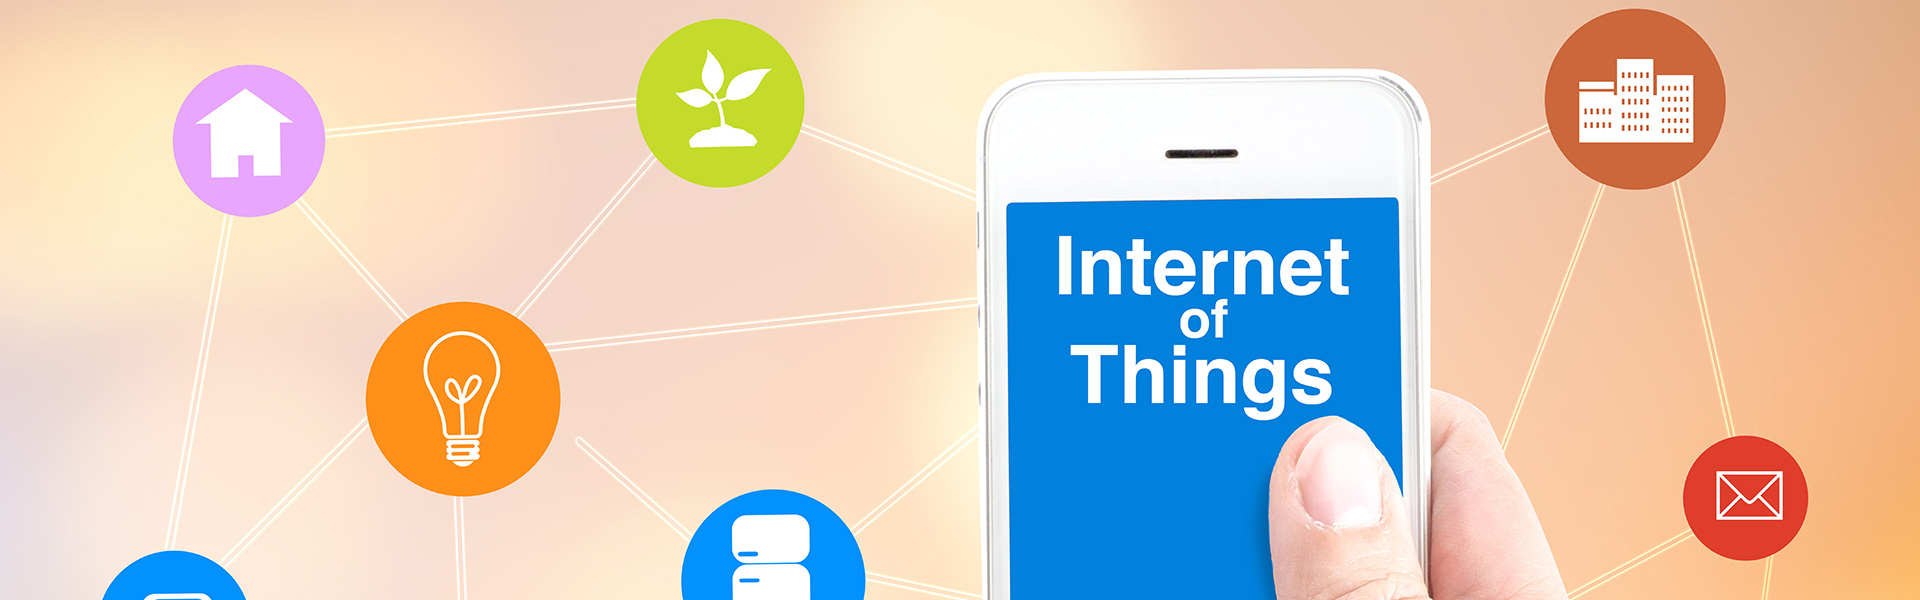 Internet of Things - Mobile Engagement - Industria 4.0